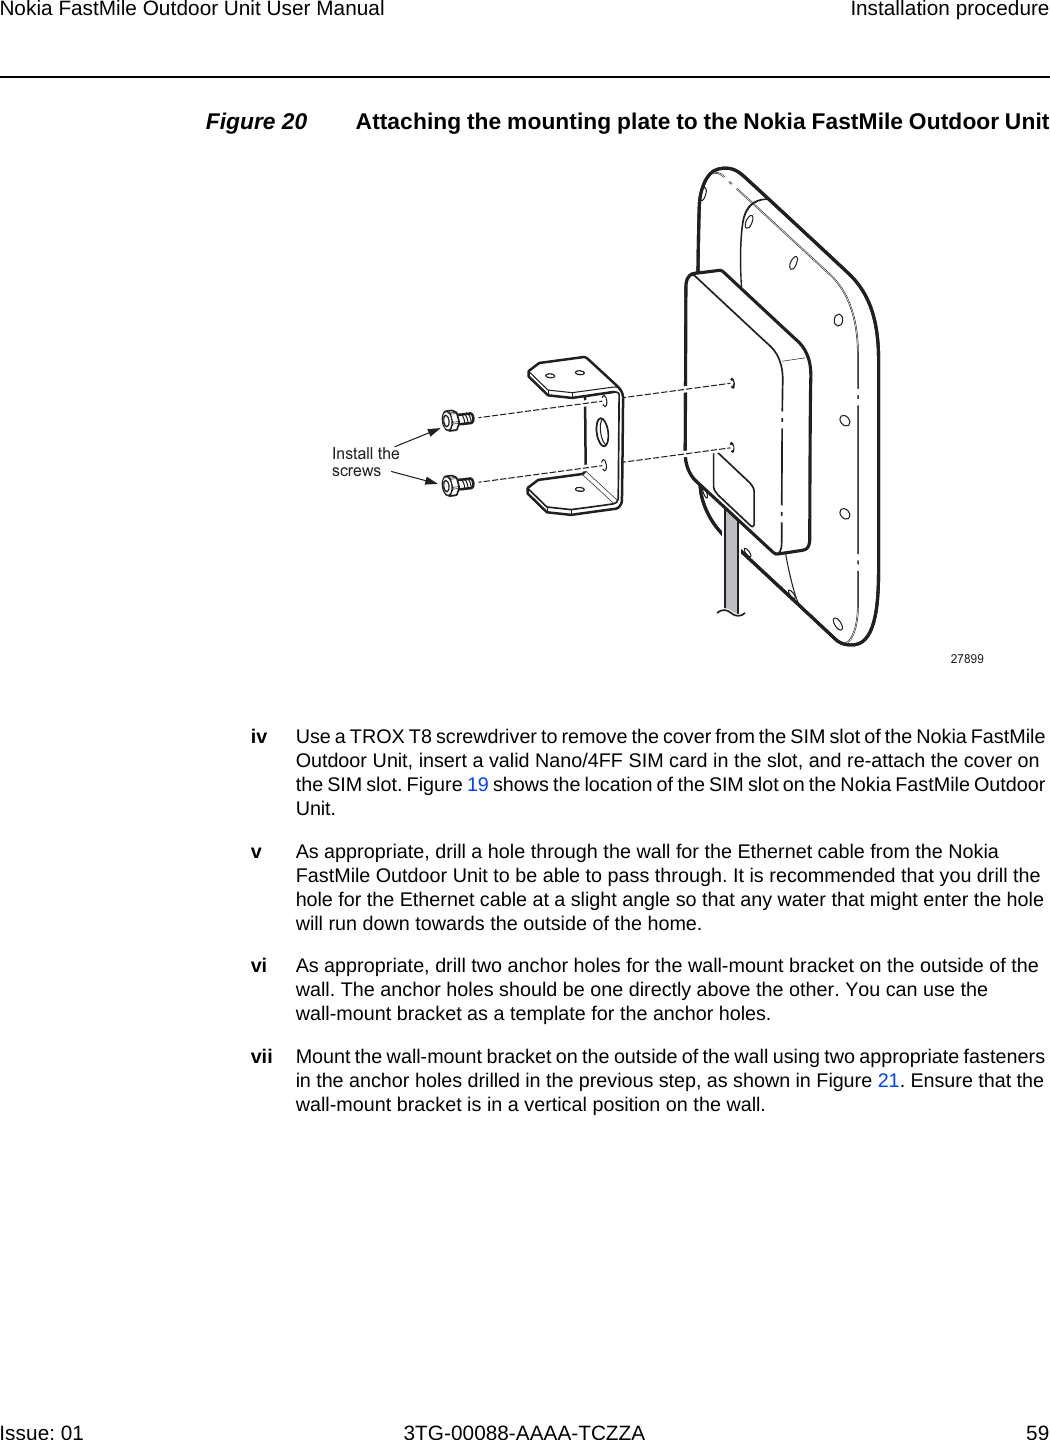 Nokia FastMile Outdoor Unit User Manual Installation procedureIssue: 01 3TG-00088-AAAA-TCZZA 59 Figure 20 Attaching the mounting plate to the Nokia FastMile Outdoor Unitiv Use a TROX T8 screwdriver to remove the cover from the SIM slot of the Nokia FastMile Outdoor Unit, insert a valid Nano/4FF SIM card in the slot, and re-attach the cover on the SIM slot. Figure 19 shows the location of the SIM slot on the Nokia FastMile Outdoor Unit.vAs appropriate, drill a hole through the wall for the Ethernet cable from the Nokia FastMile Outdoor Unit to be able to pass through. It is recommended that you drill the hole for the Ethernet cable at a slight angle so that any water that might enter the hole will run down towards the outside of the home.vi As appropriate, drill two anchor holes for the wall-mount bracket on the outside of the wall. The anchor holes should be one directly above the other. You can use the wall-mount bracket as a template for the anchor holes.vii Mount the wall-mount bracket on the outside of the wall using two appropriate fasteners in the anchor holes drilled in the previous step, as shown in Figure 21. Ensure that the wall-mount bracket is in a vertical position on the wall. Install thescrews27899